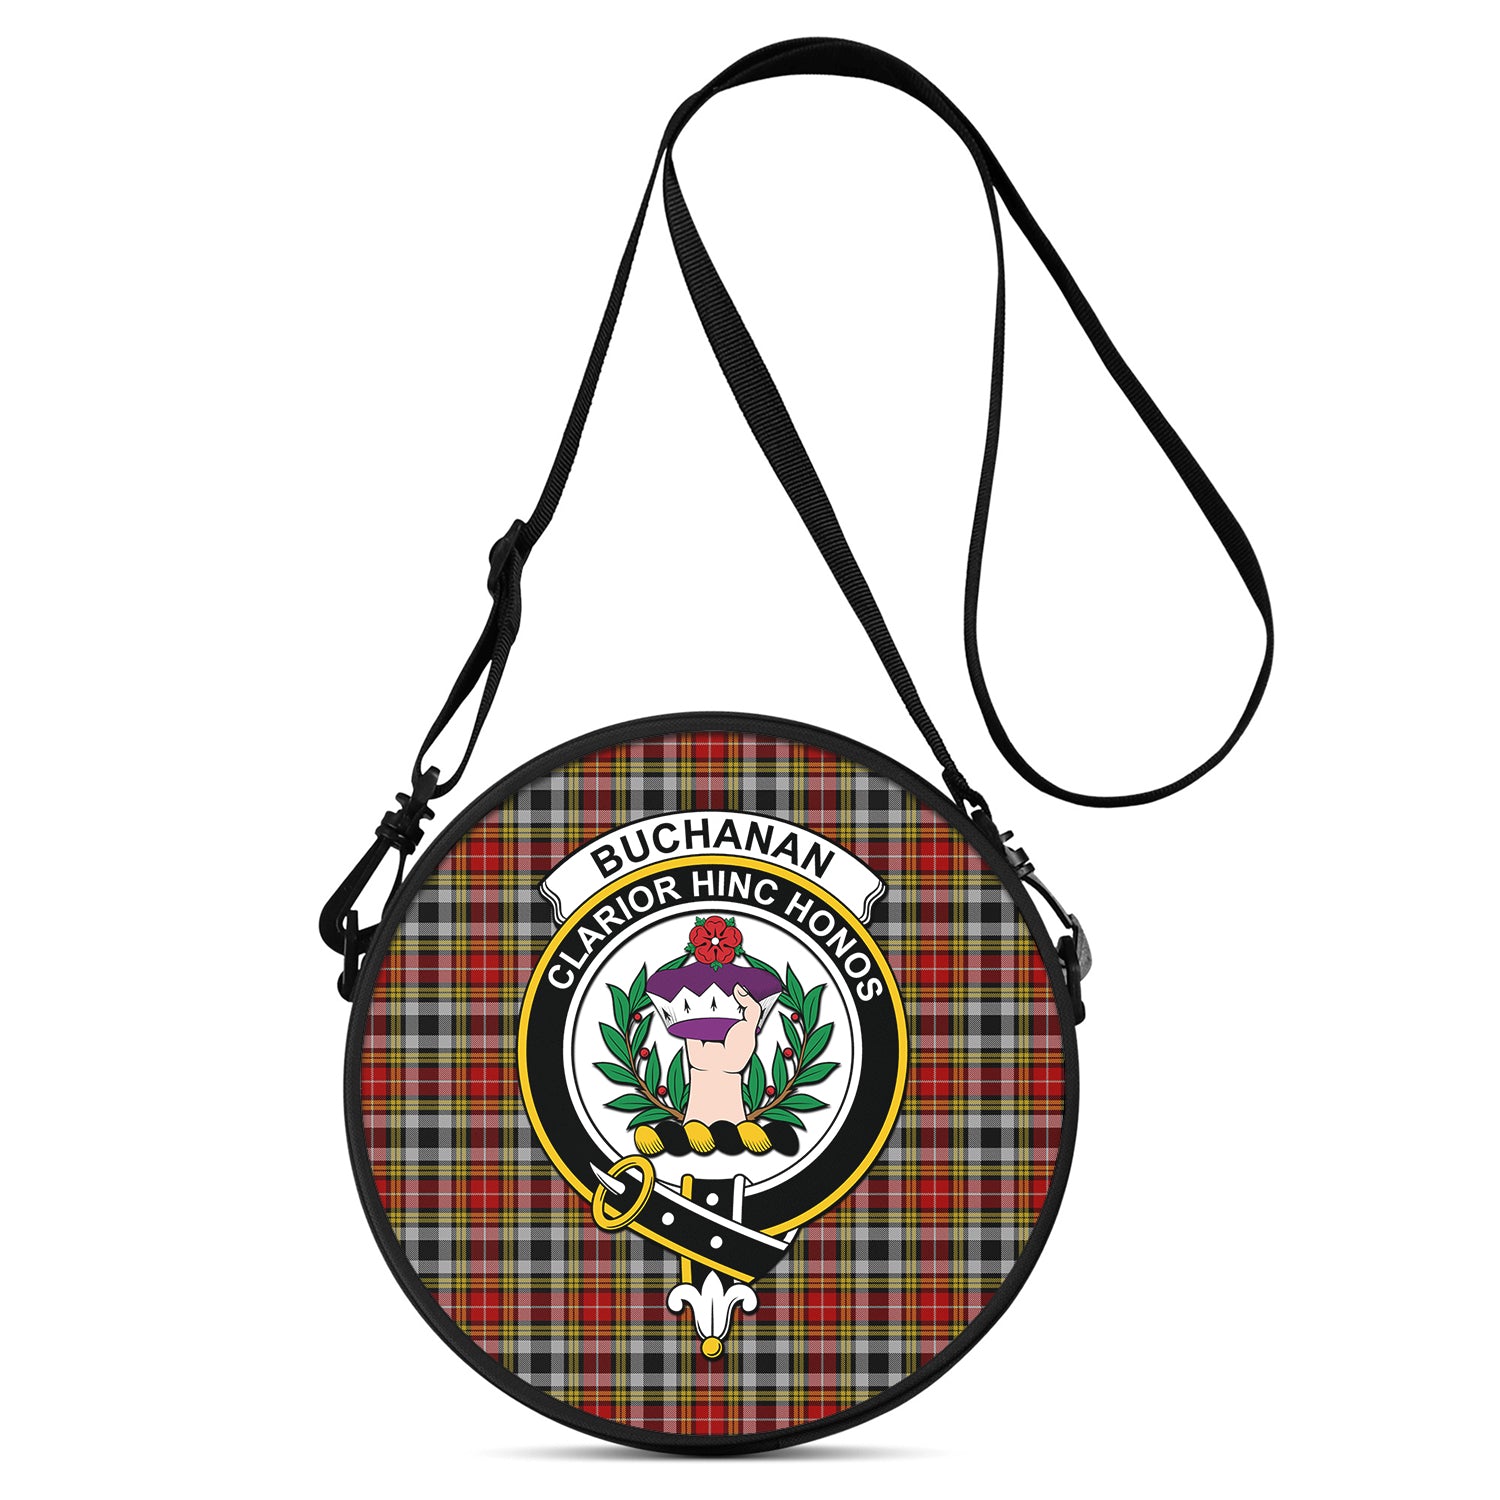 Buchanan Old Dress Tartan Round Satchel Bags with Family Crest One Size 9*9*2.7 inch - Tartanvibesclothing